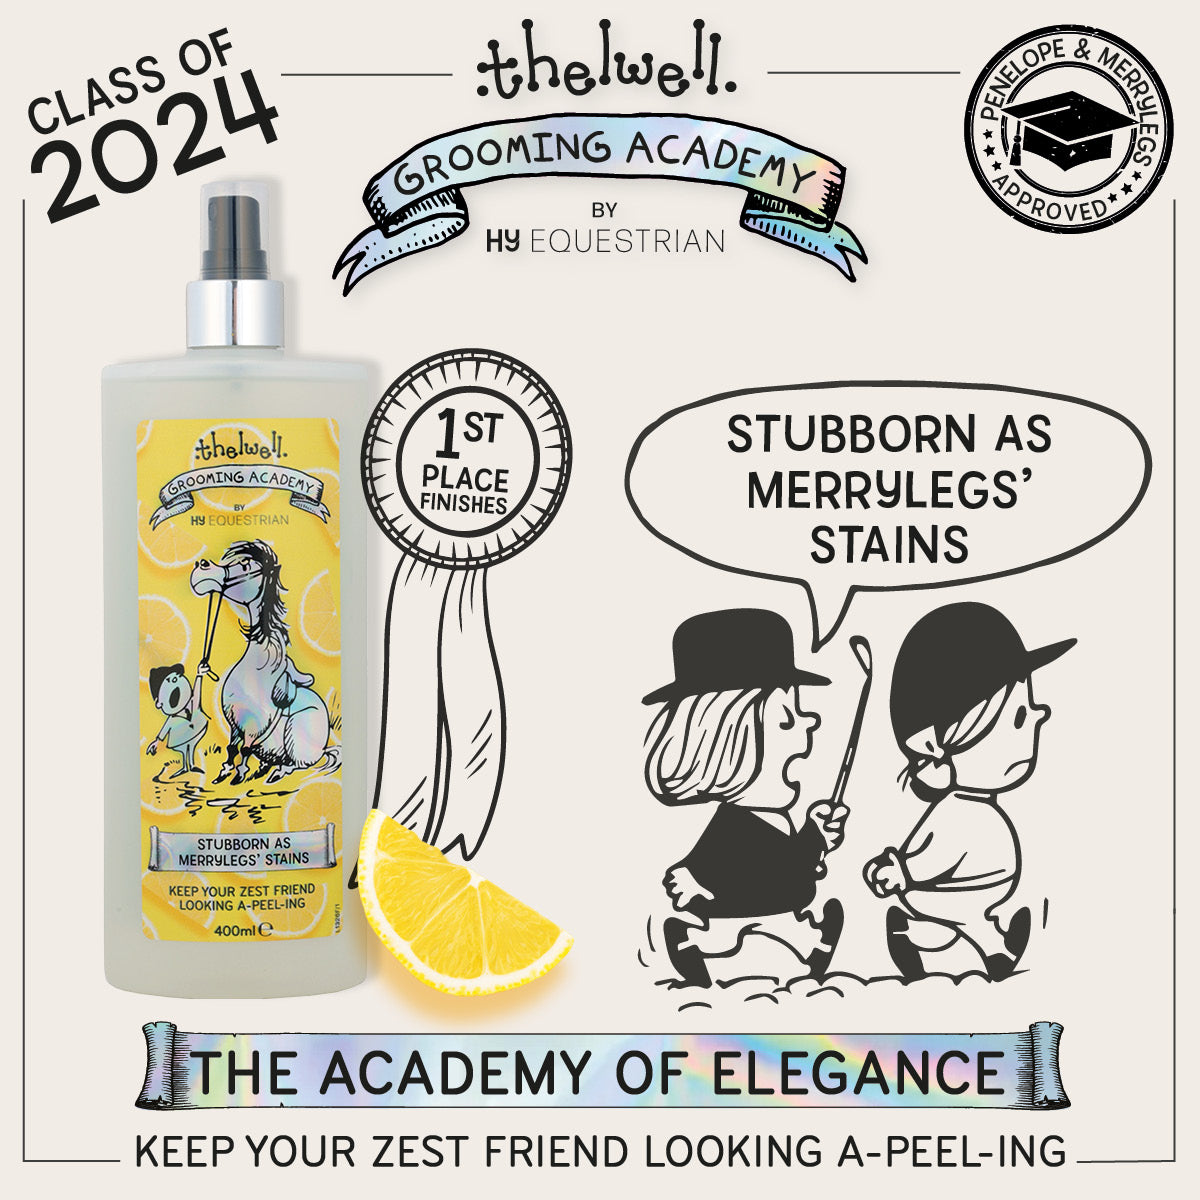 Thelwell Grooming Academy by Hy Equestrian - Stubborn as Merrylegs Stains